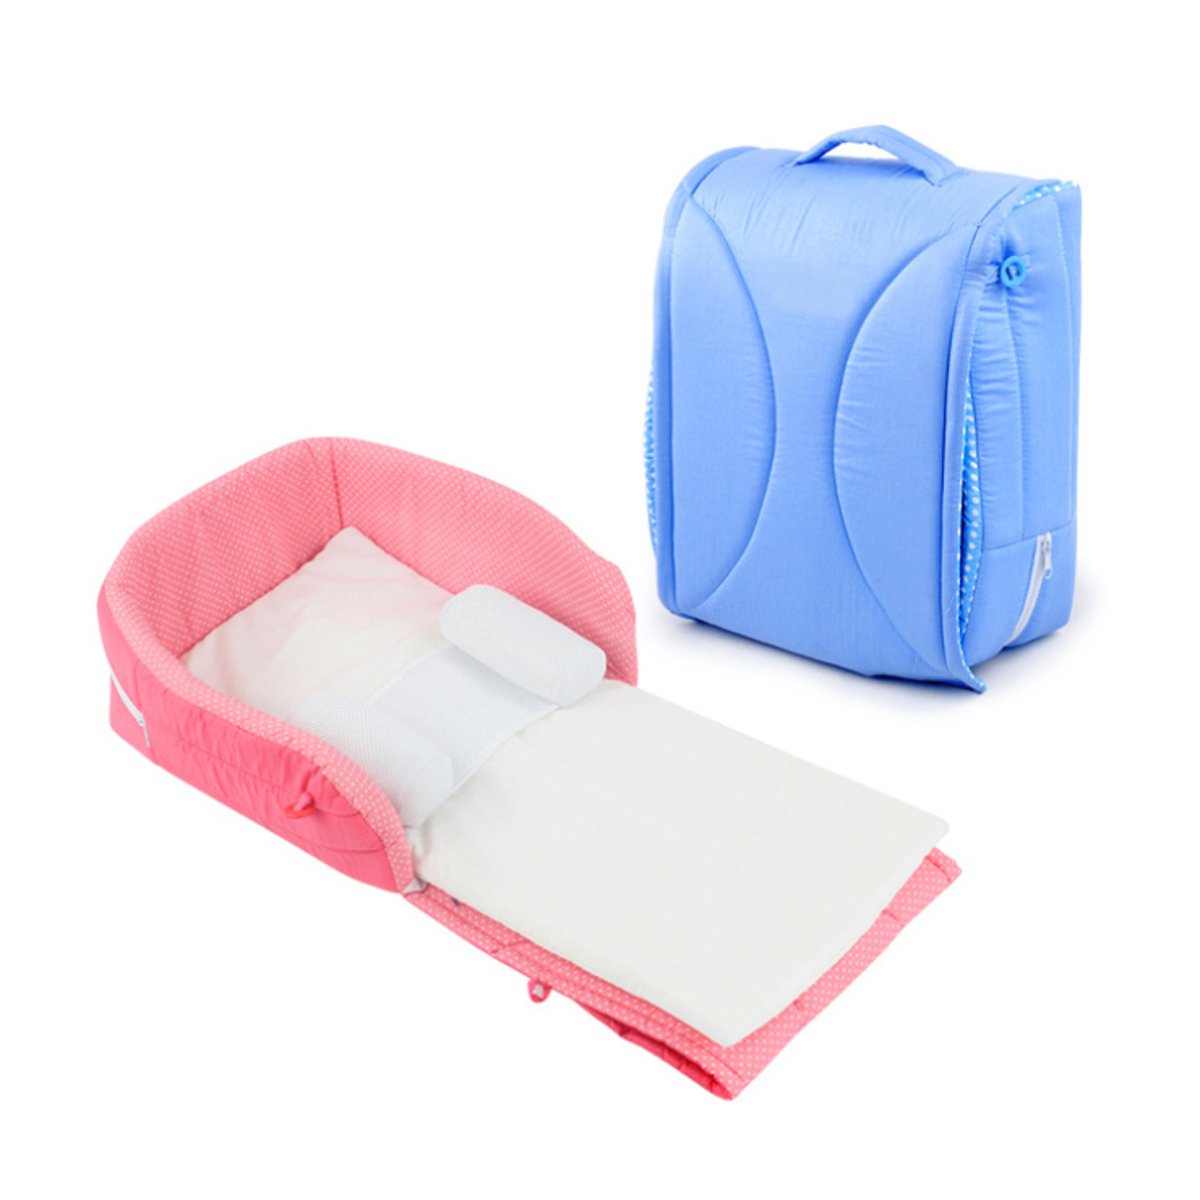 

Portable Nursery Infant Baby Crib Cot Folding Travel Sleeping Bed Carrying Bag